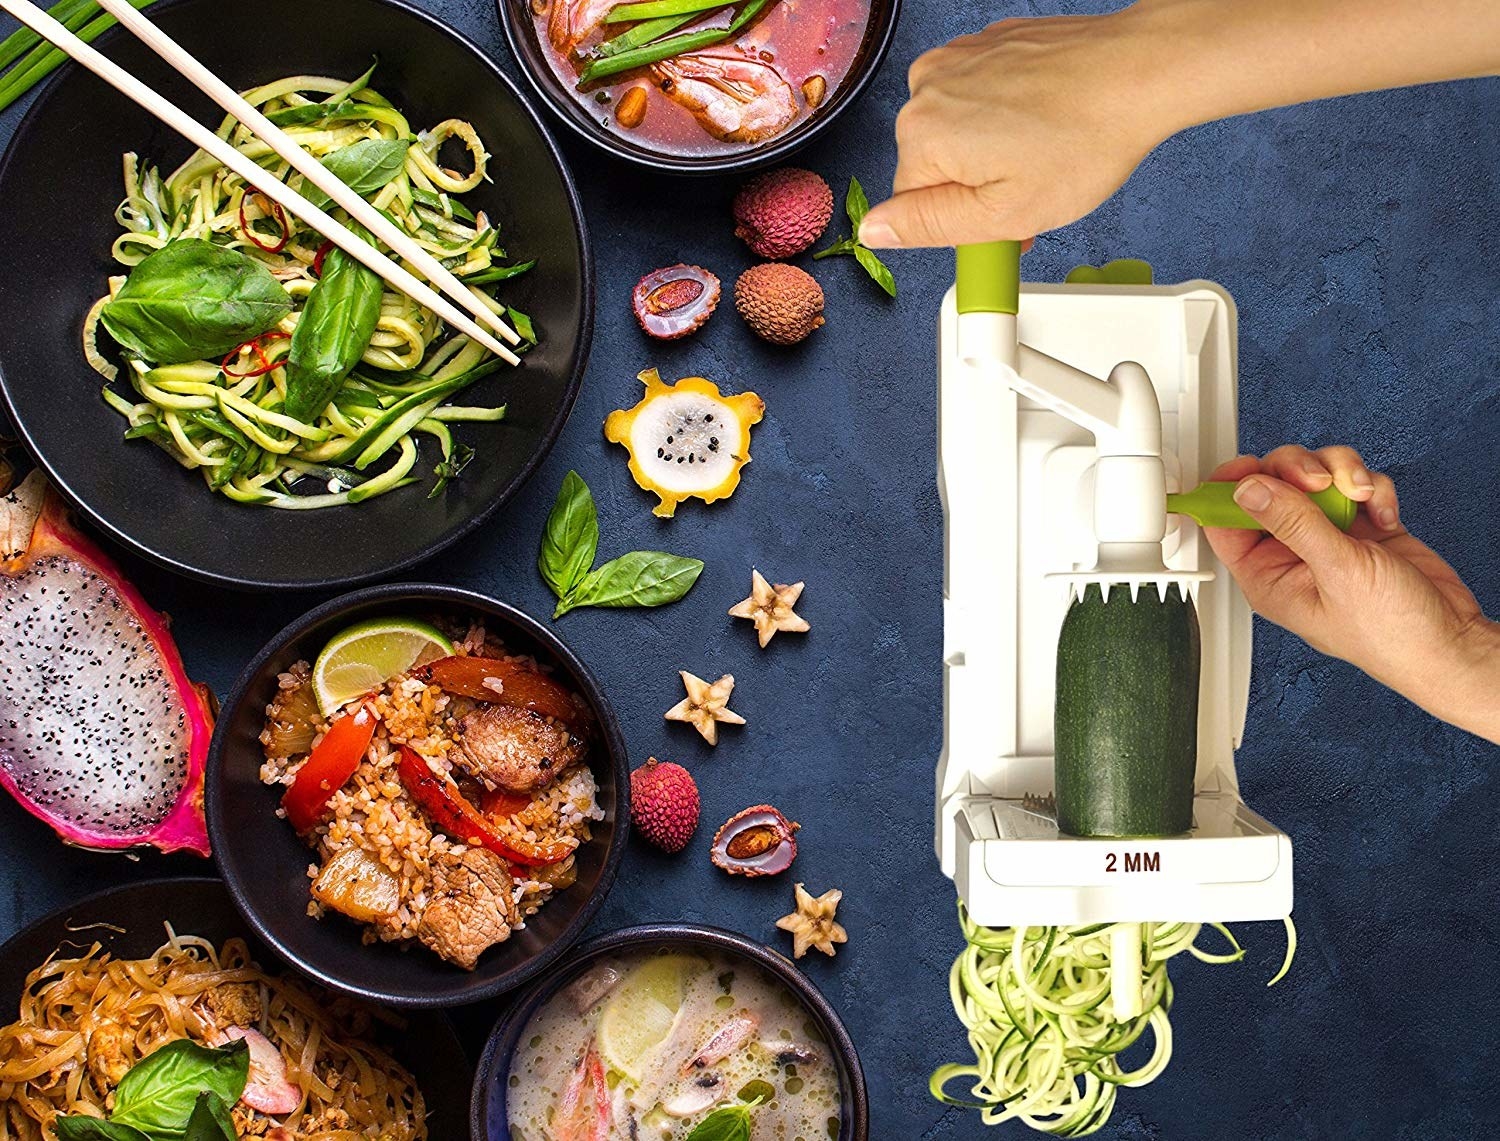 13 Small Kitchen Appliances & Gadgets That Give Tiny Kitchens More